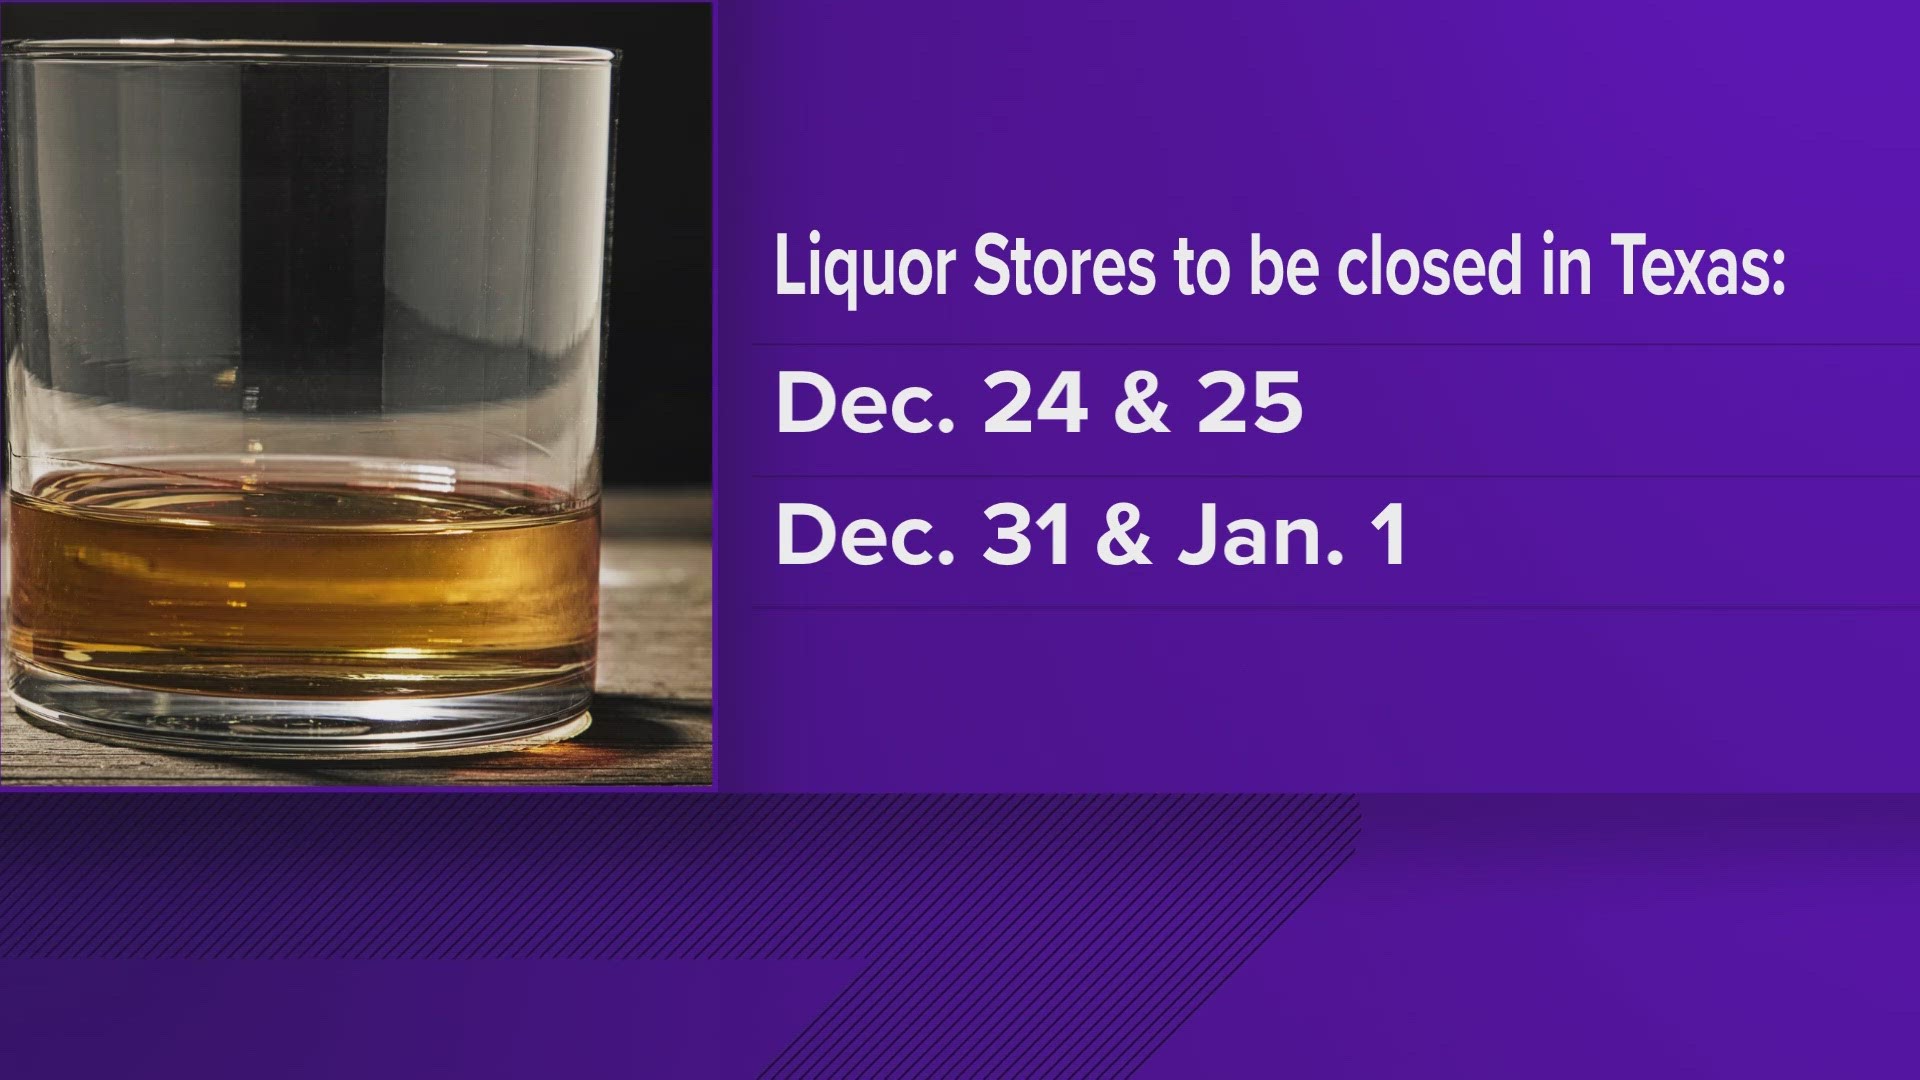 Make sure you plan ahead if you're looking to pick up liquor for your Christmas or New Year's celebrations.